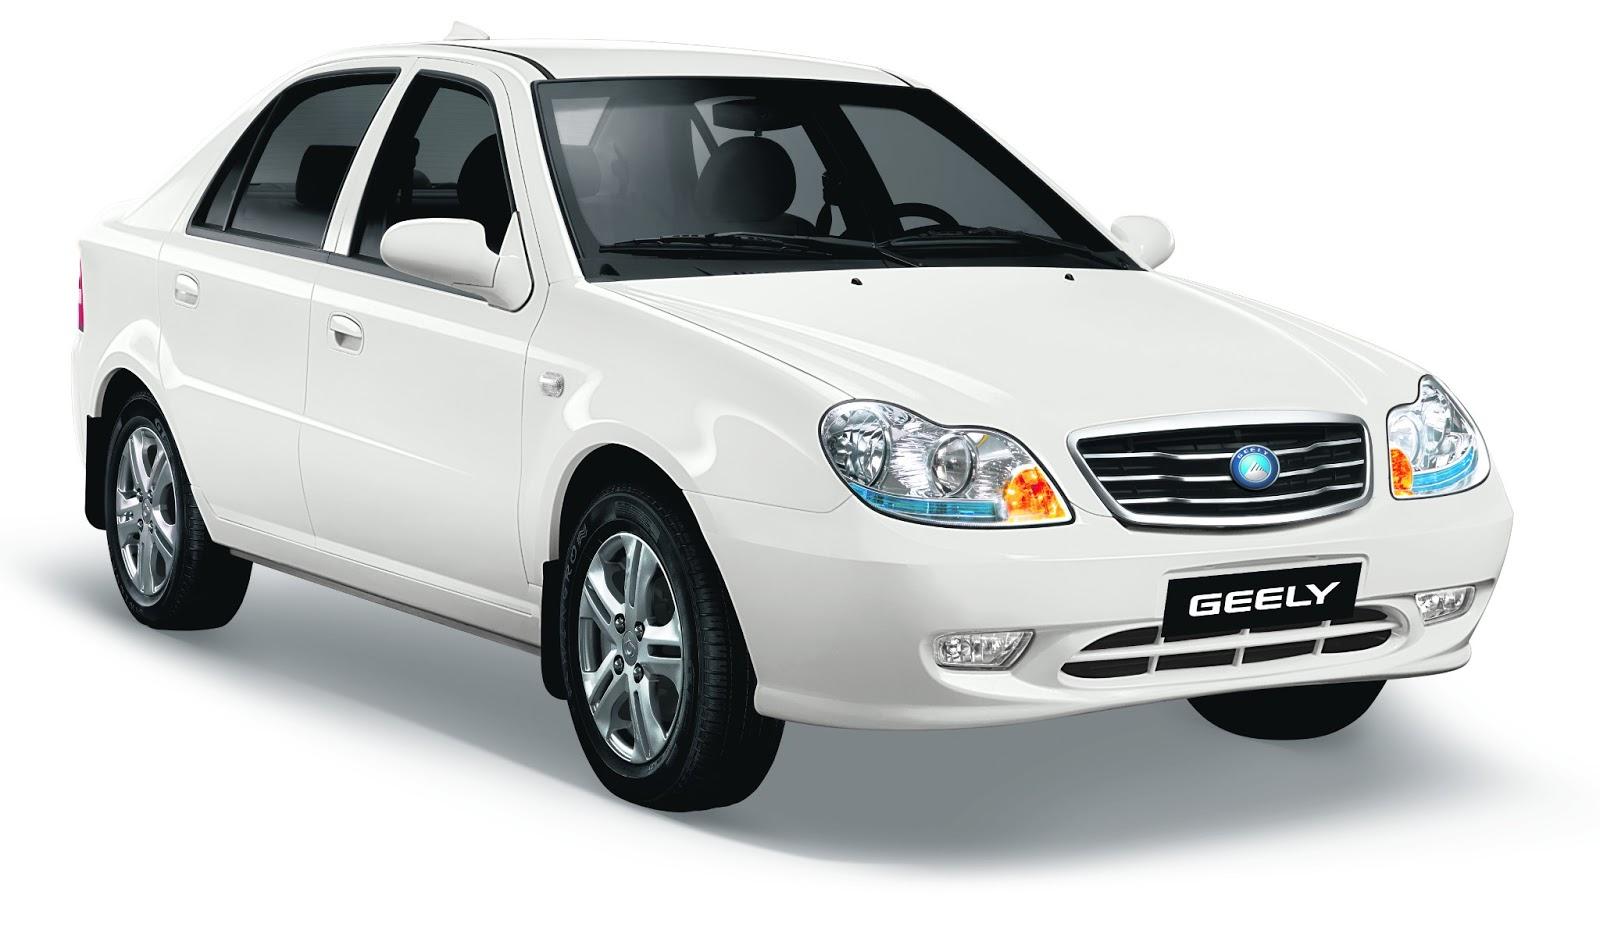 Geely CK Wallpaper HD Photo, Wallpaper and other Image